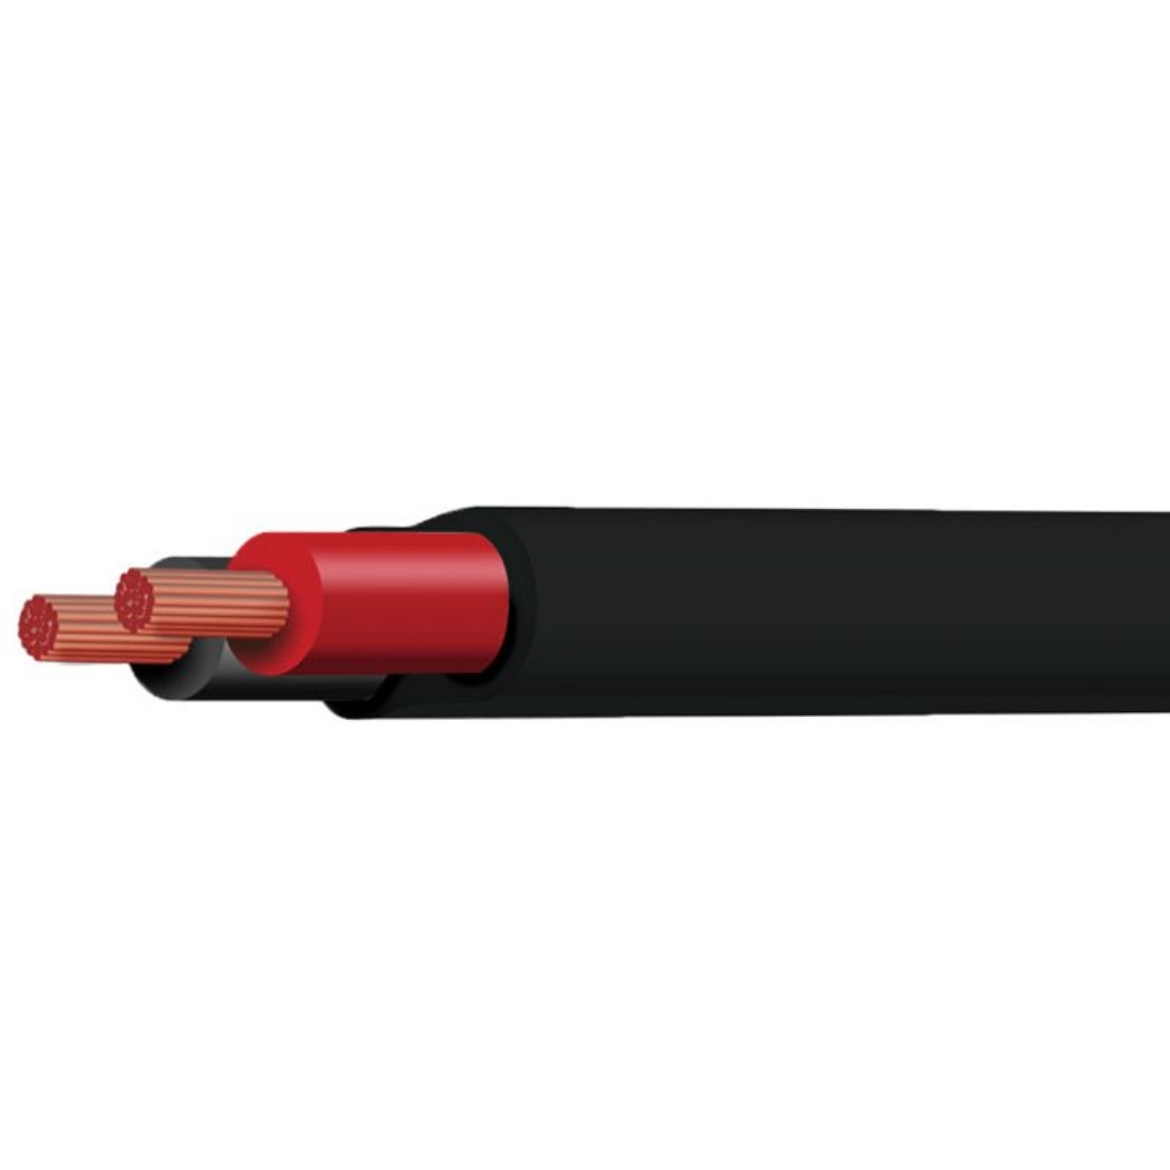 Picture of TYCAB TWIN CORE CABLE BATTERY 4 B&S CROSS SECT 20MM SQ RATING 135A BLACK/RED CUT - PER METER